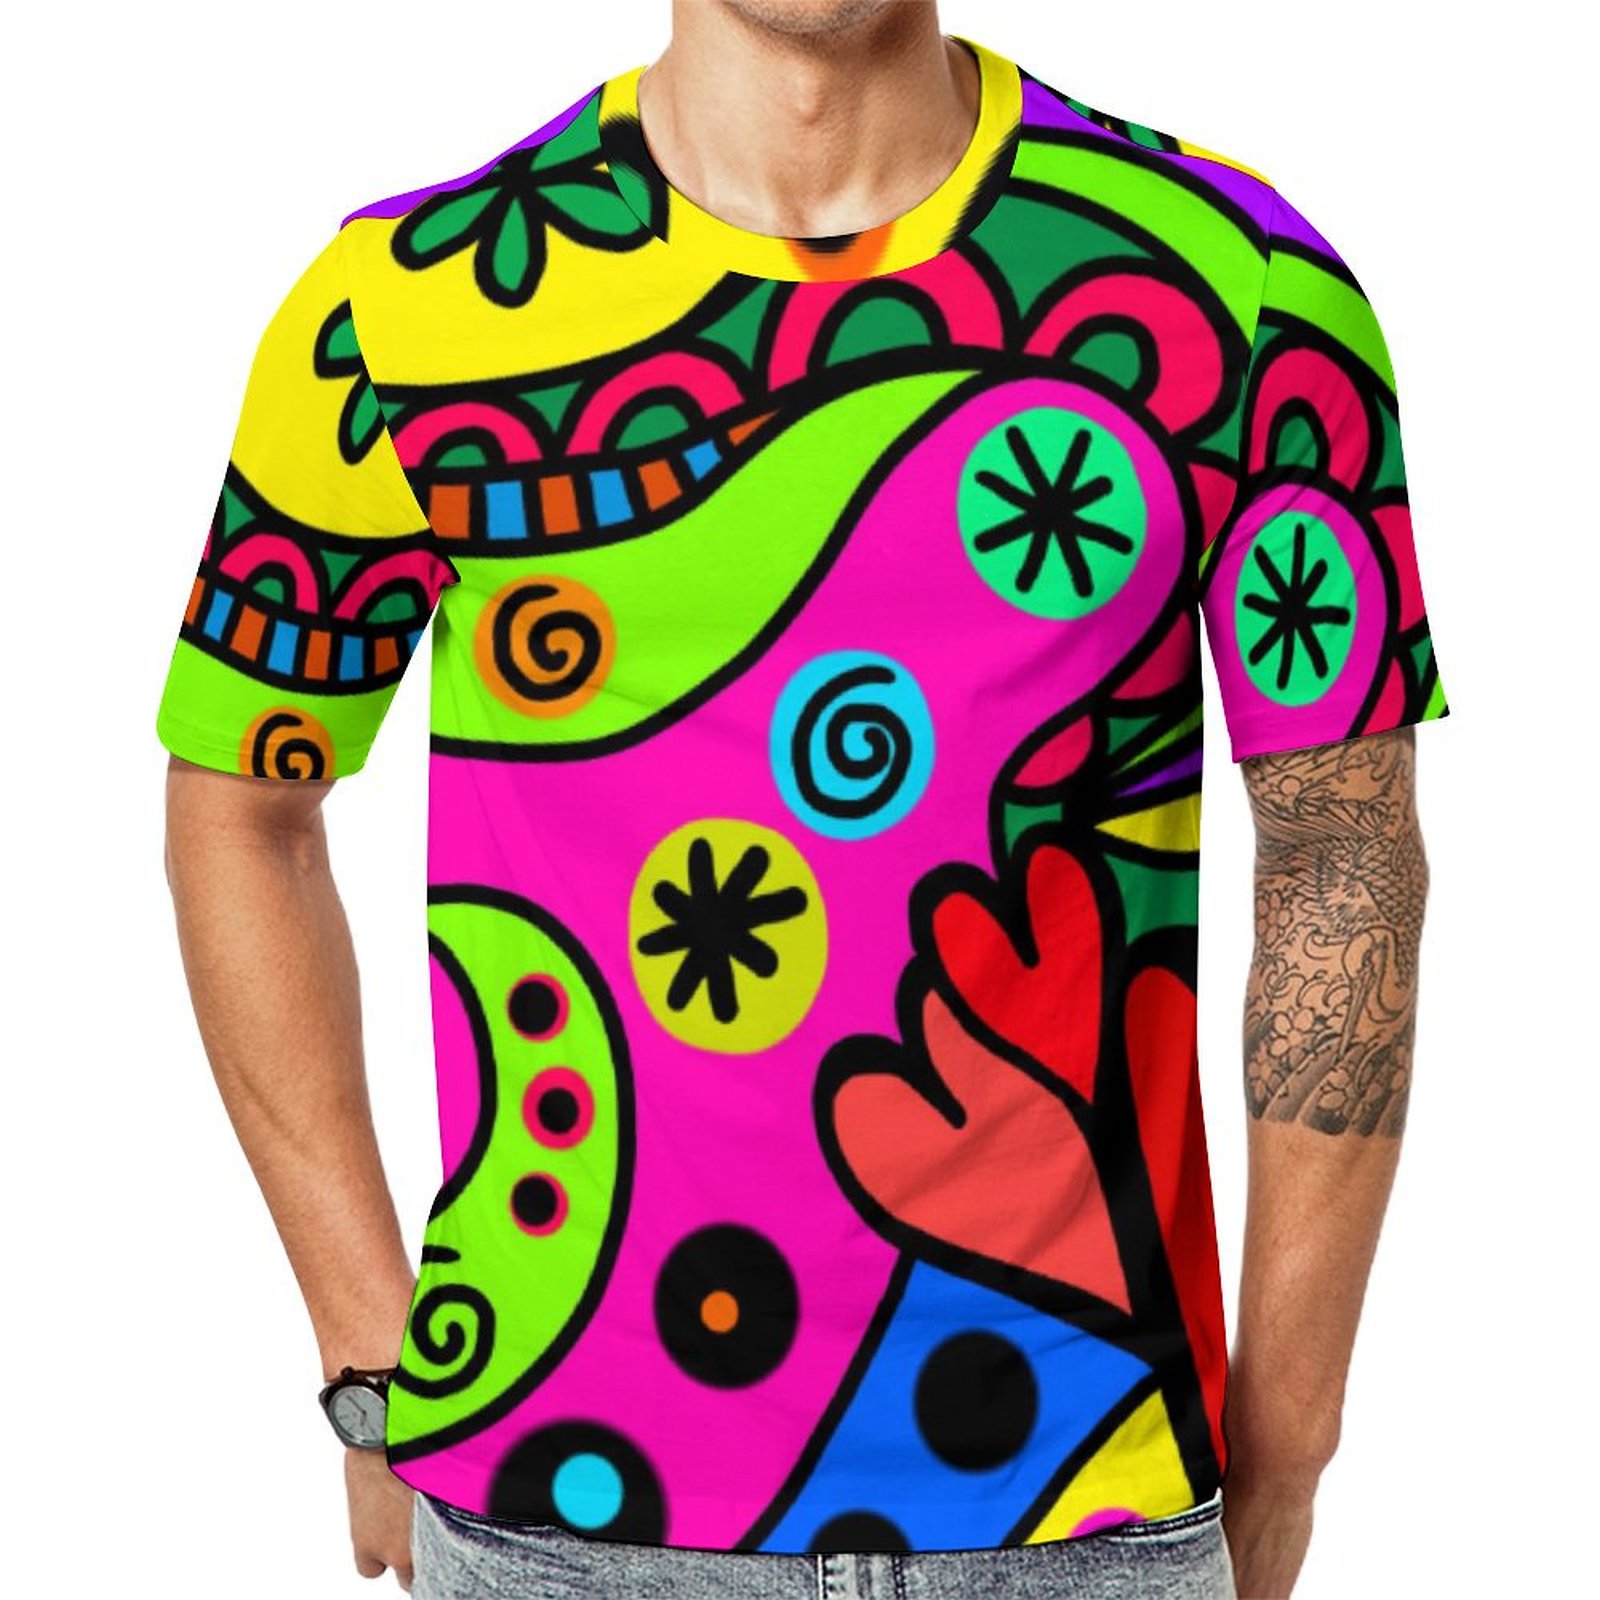 Wild Bold Bright Abstract Psychedelic Design Short Sleeve Print Unisex Tshirt Summer Casual Tees for Men and Women Coolcoshirts